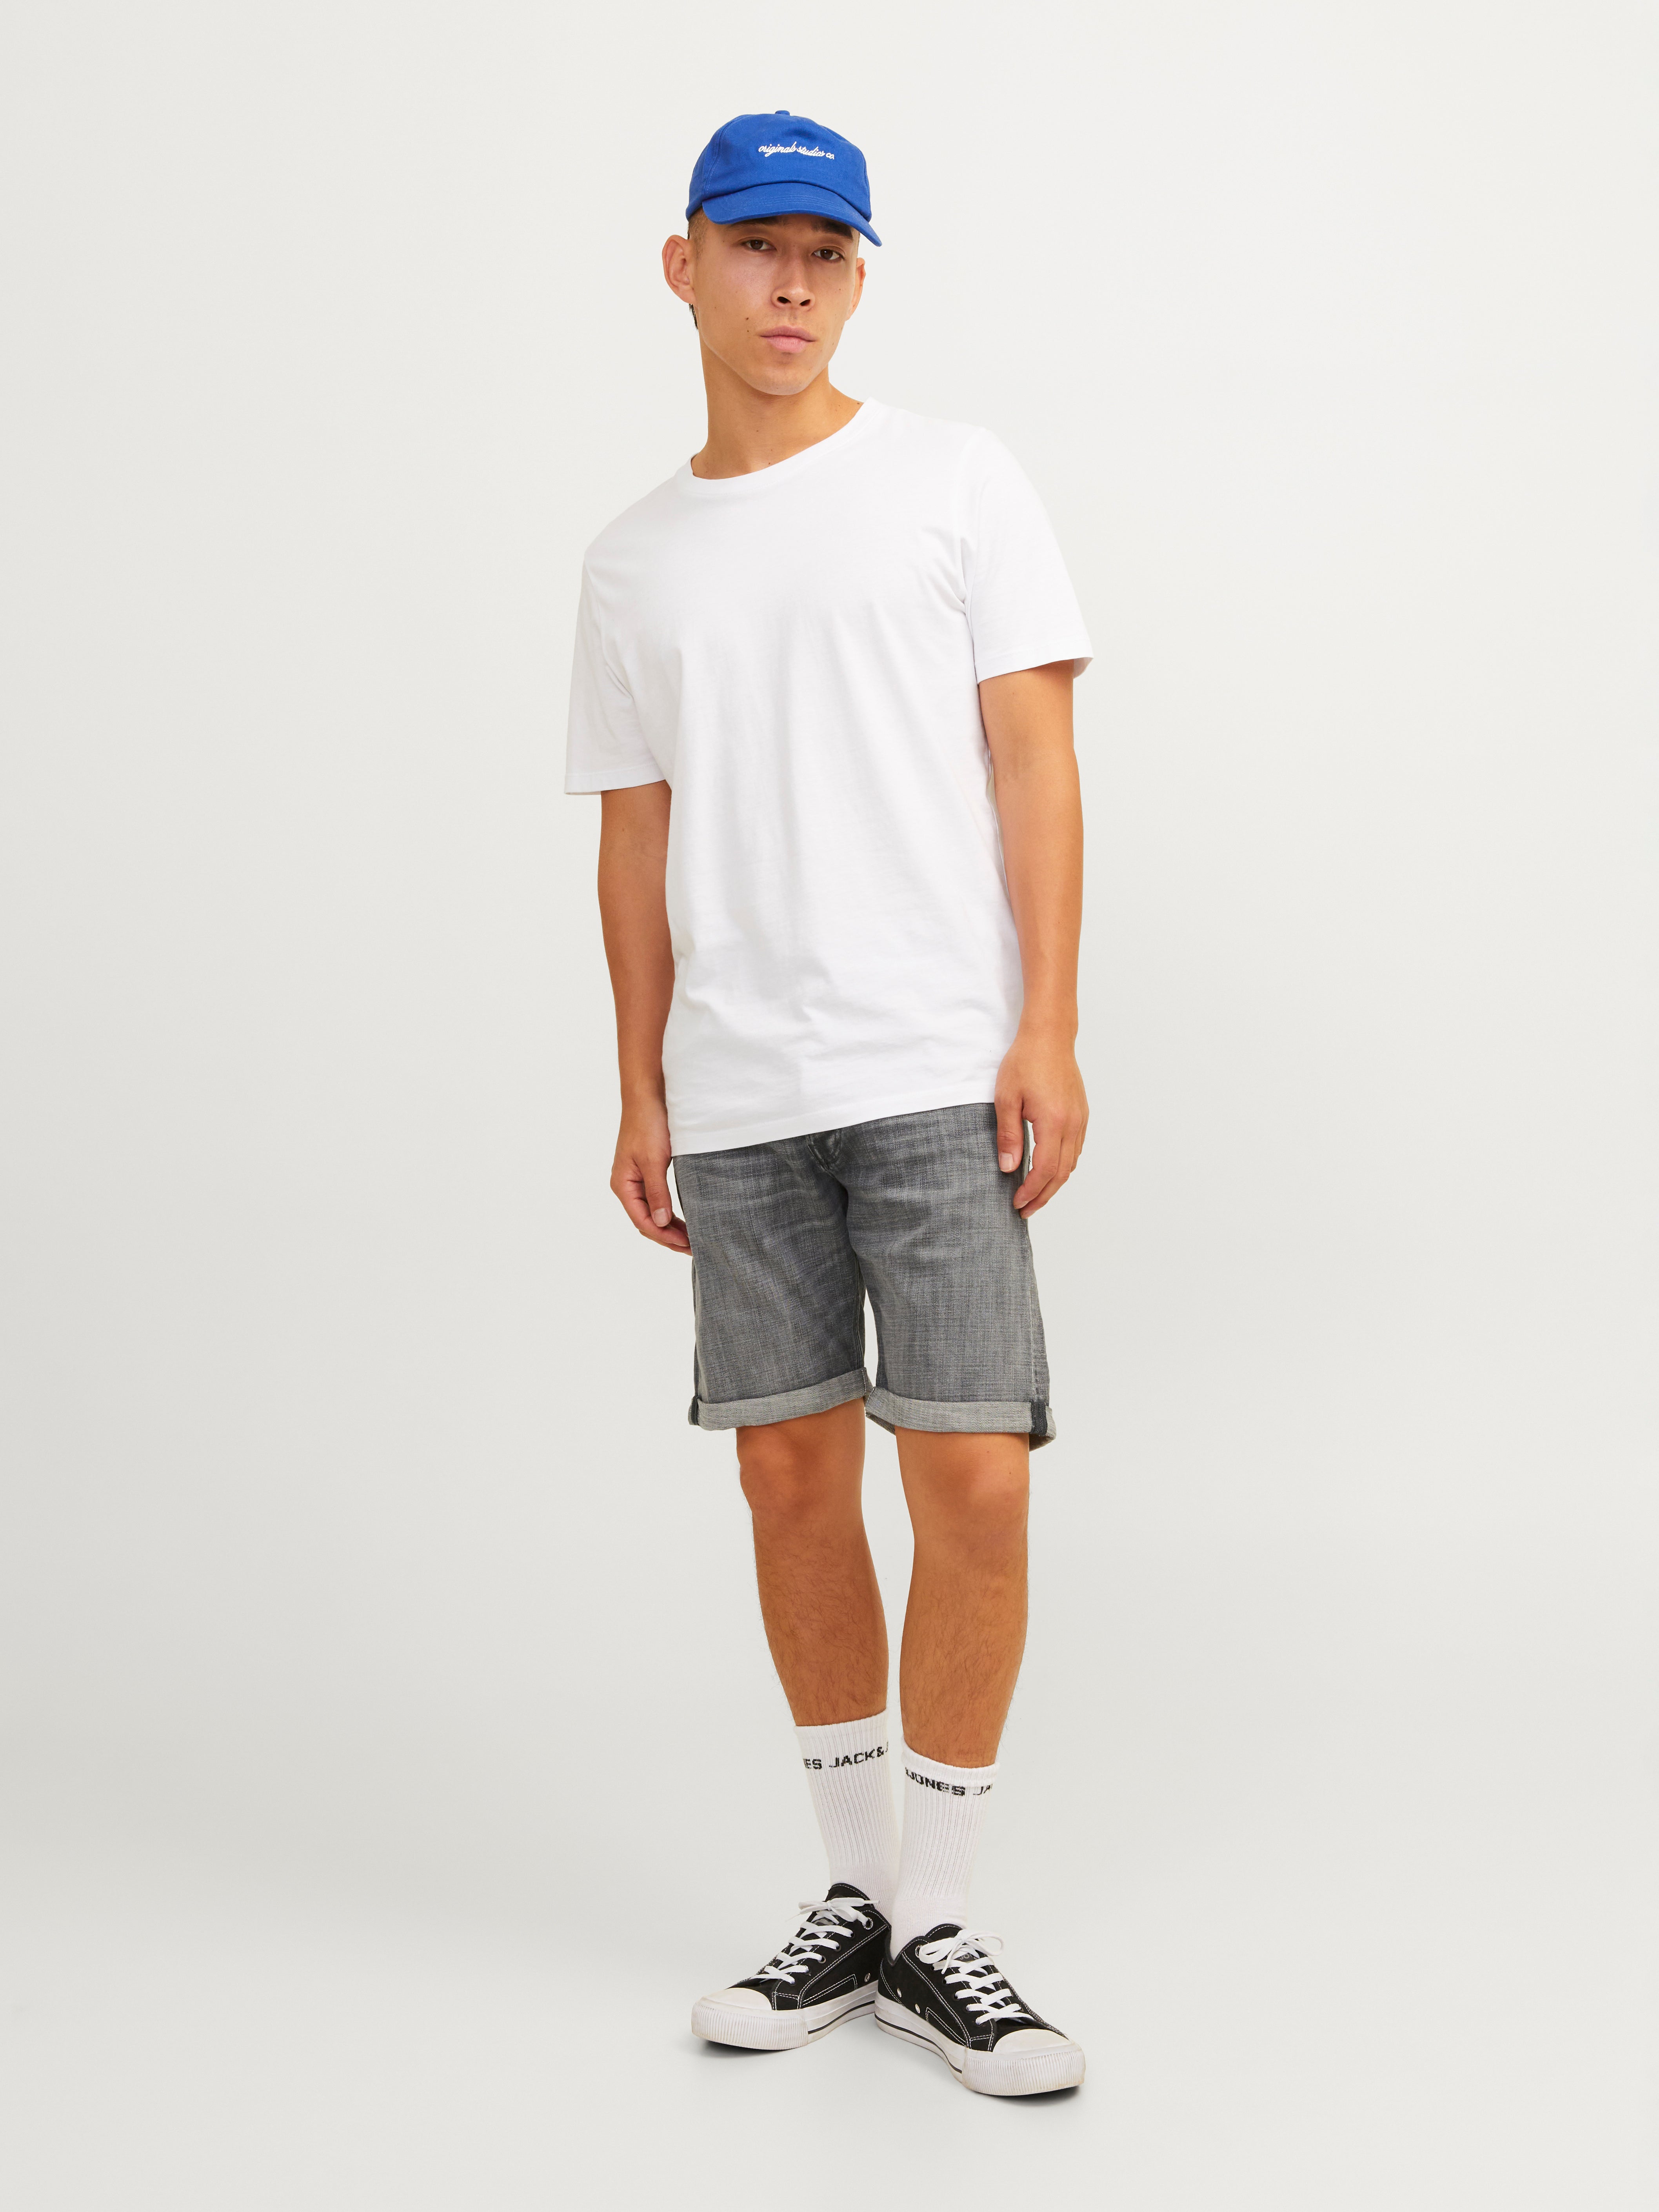 Relaxed Fit Shorts | Jack & Jones